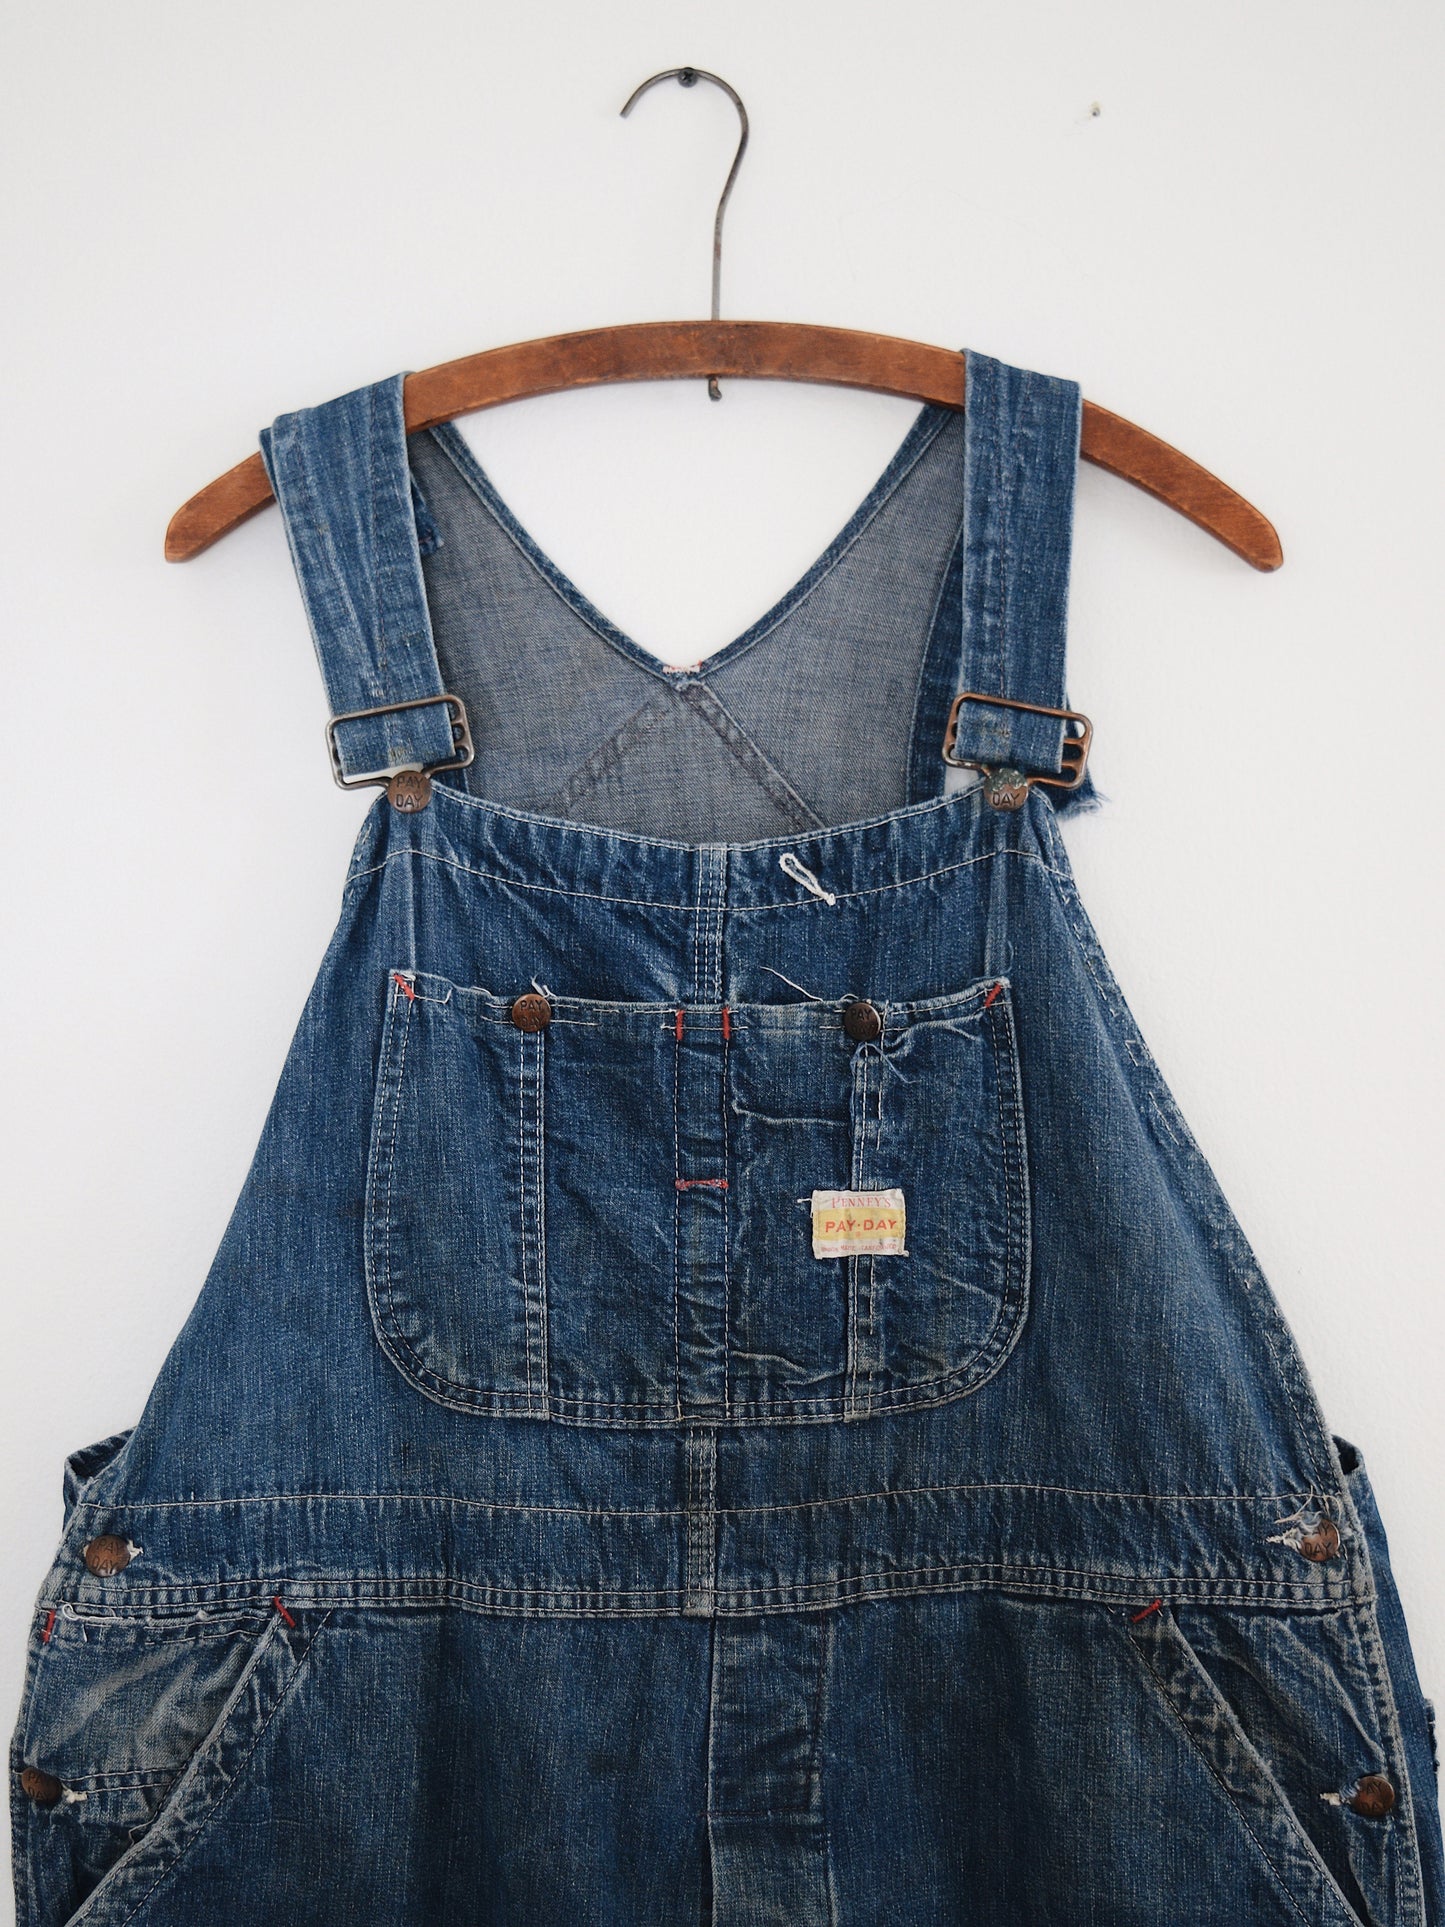 1950s Pay Day Overalls